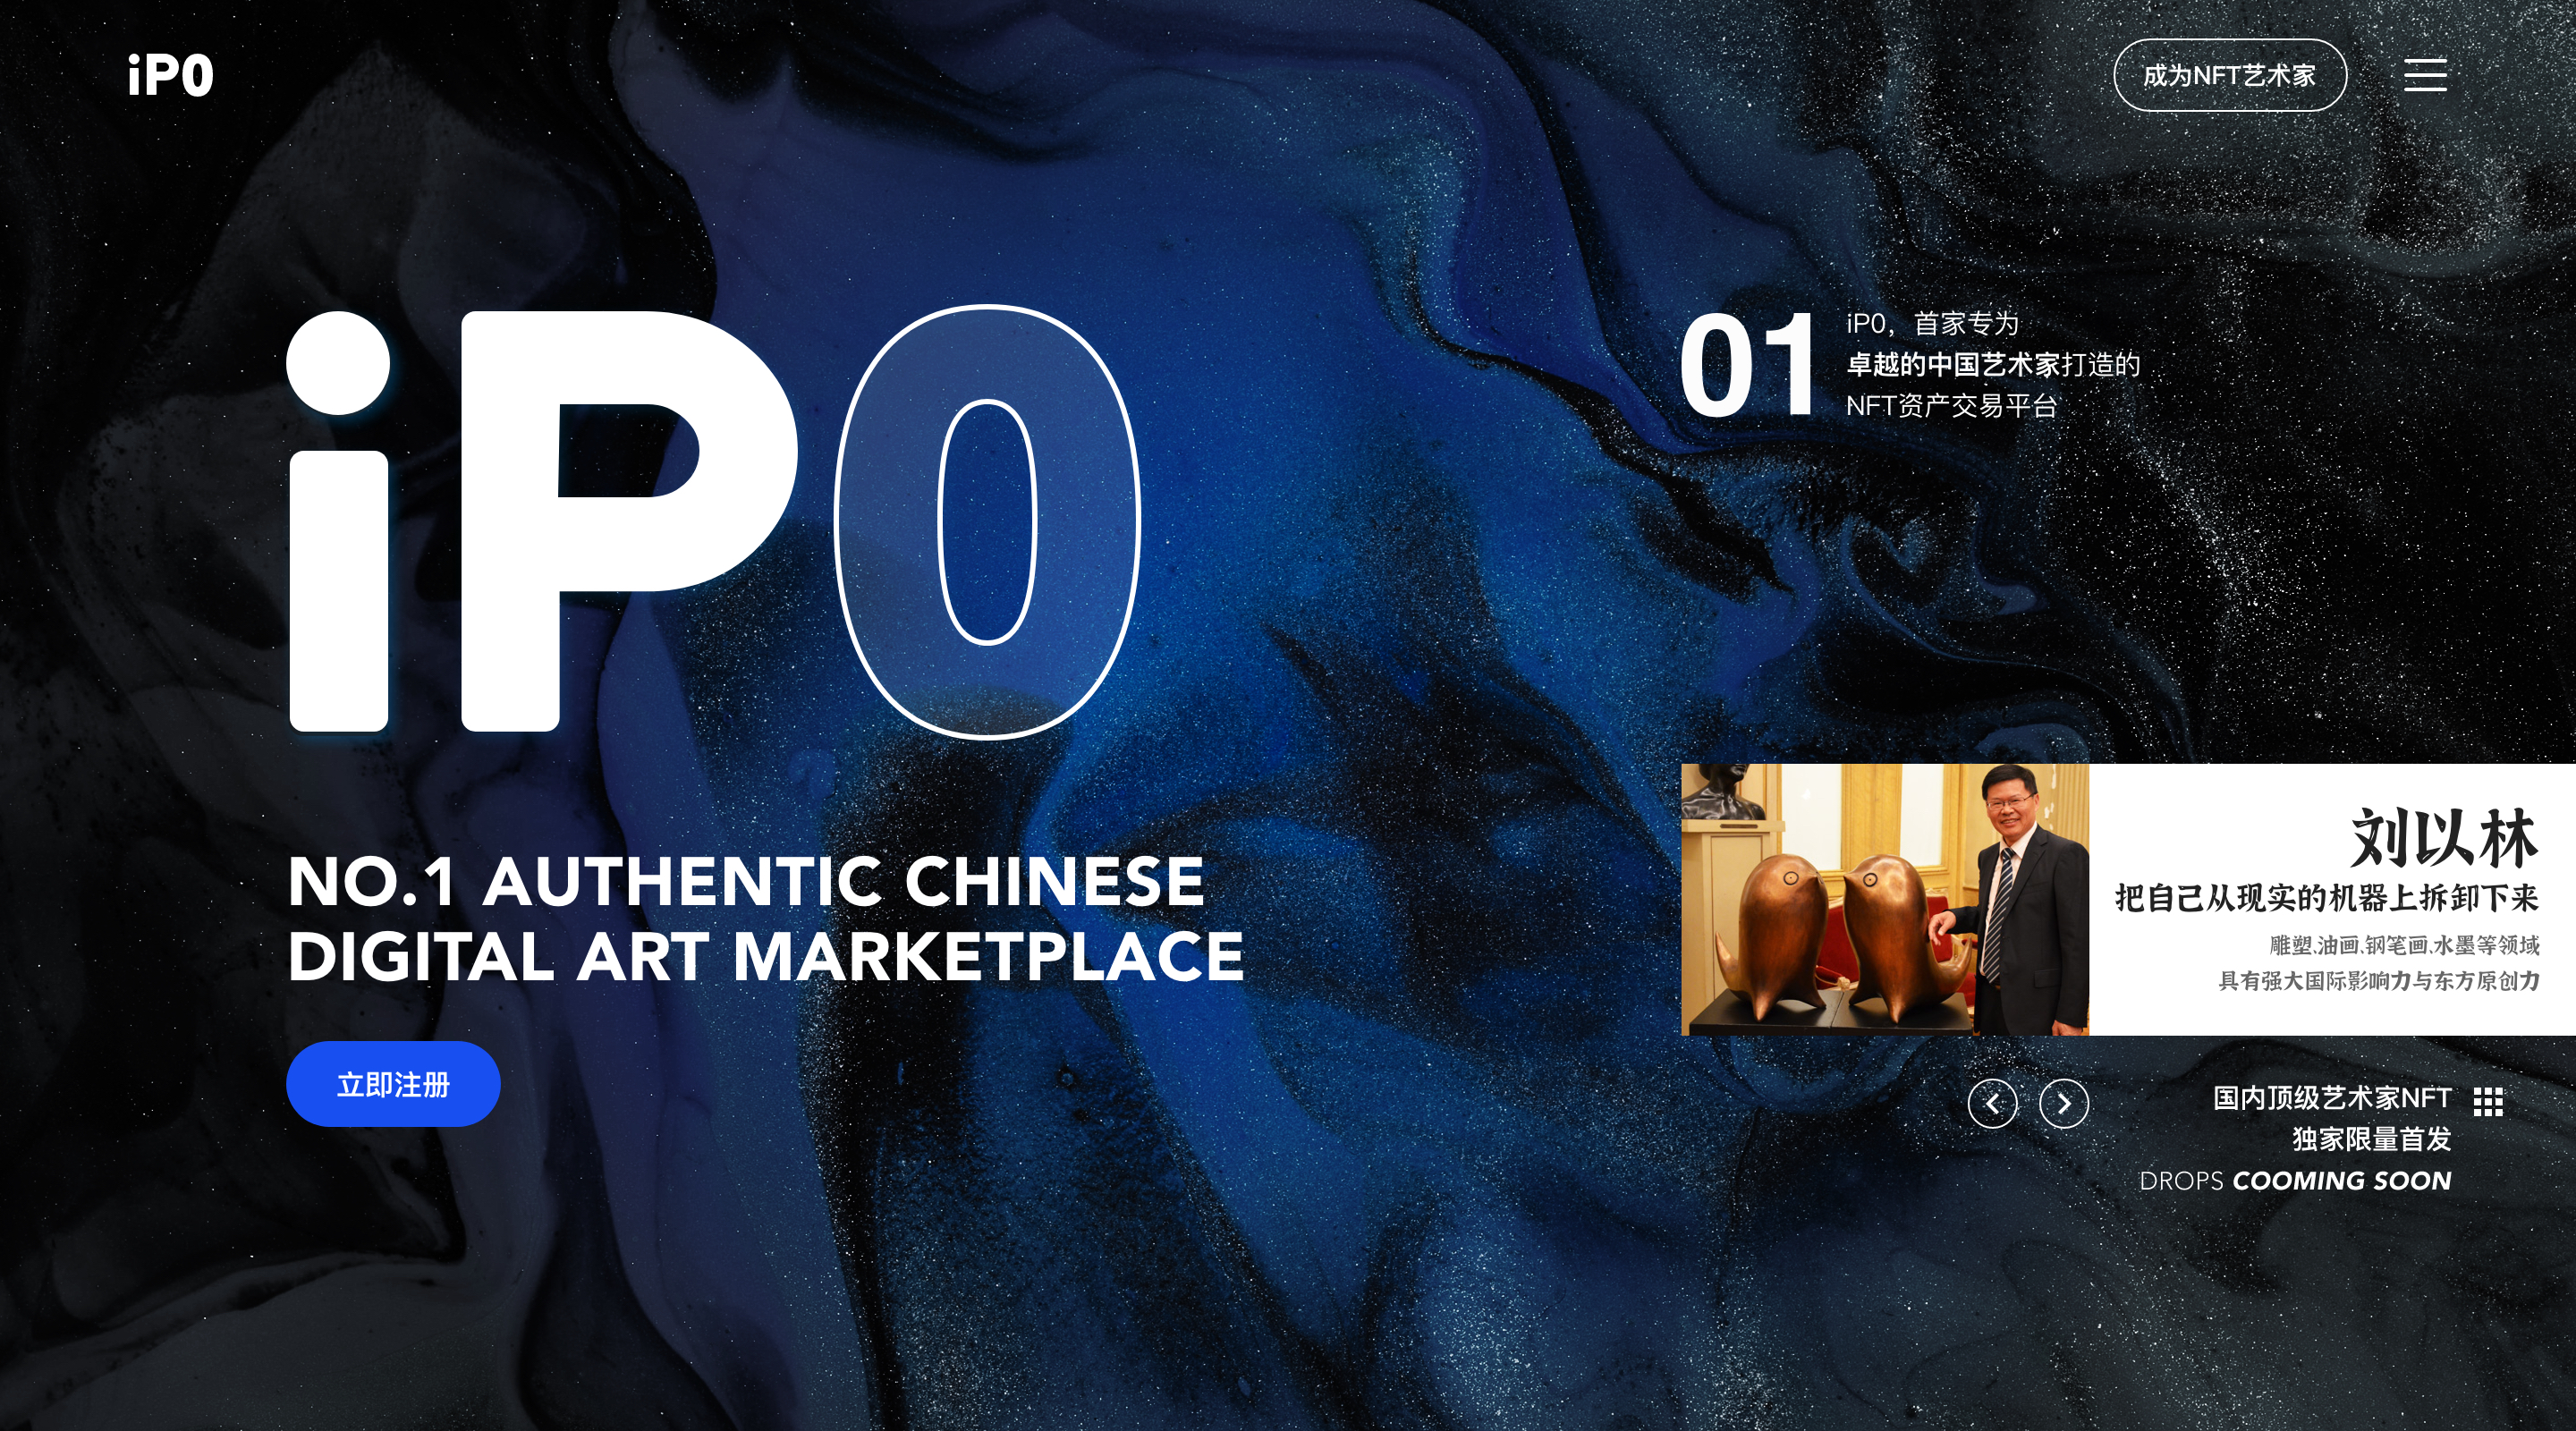 IP0.COM: First Chinese Digital Art NFT Marketplace Debuts – A Milestone in Opening Up the Chinese NFT Market